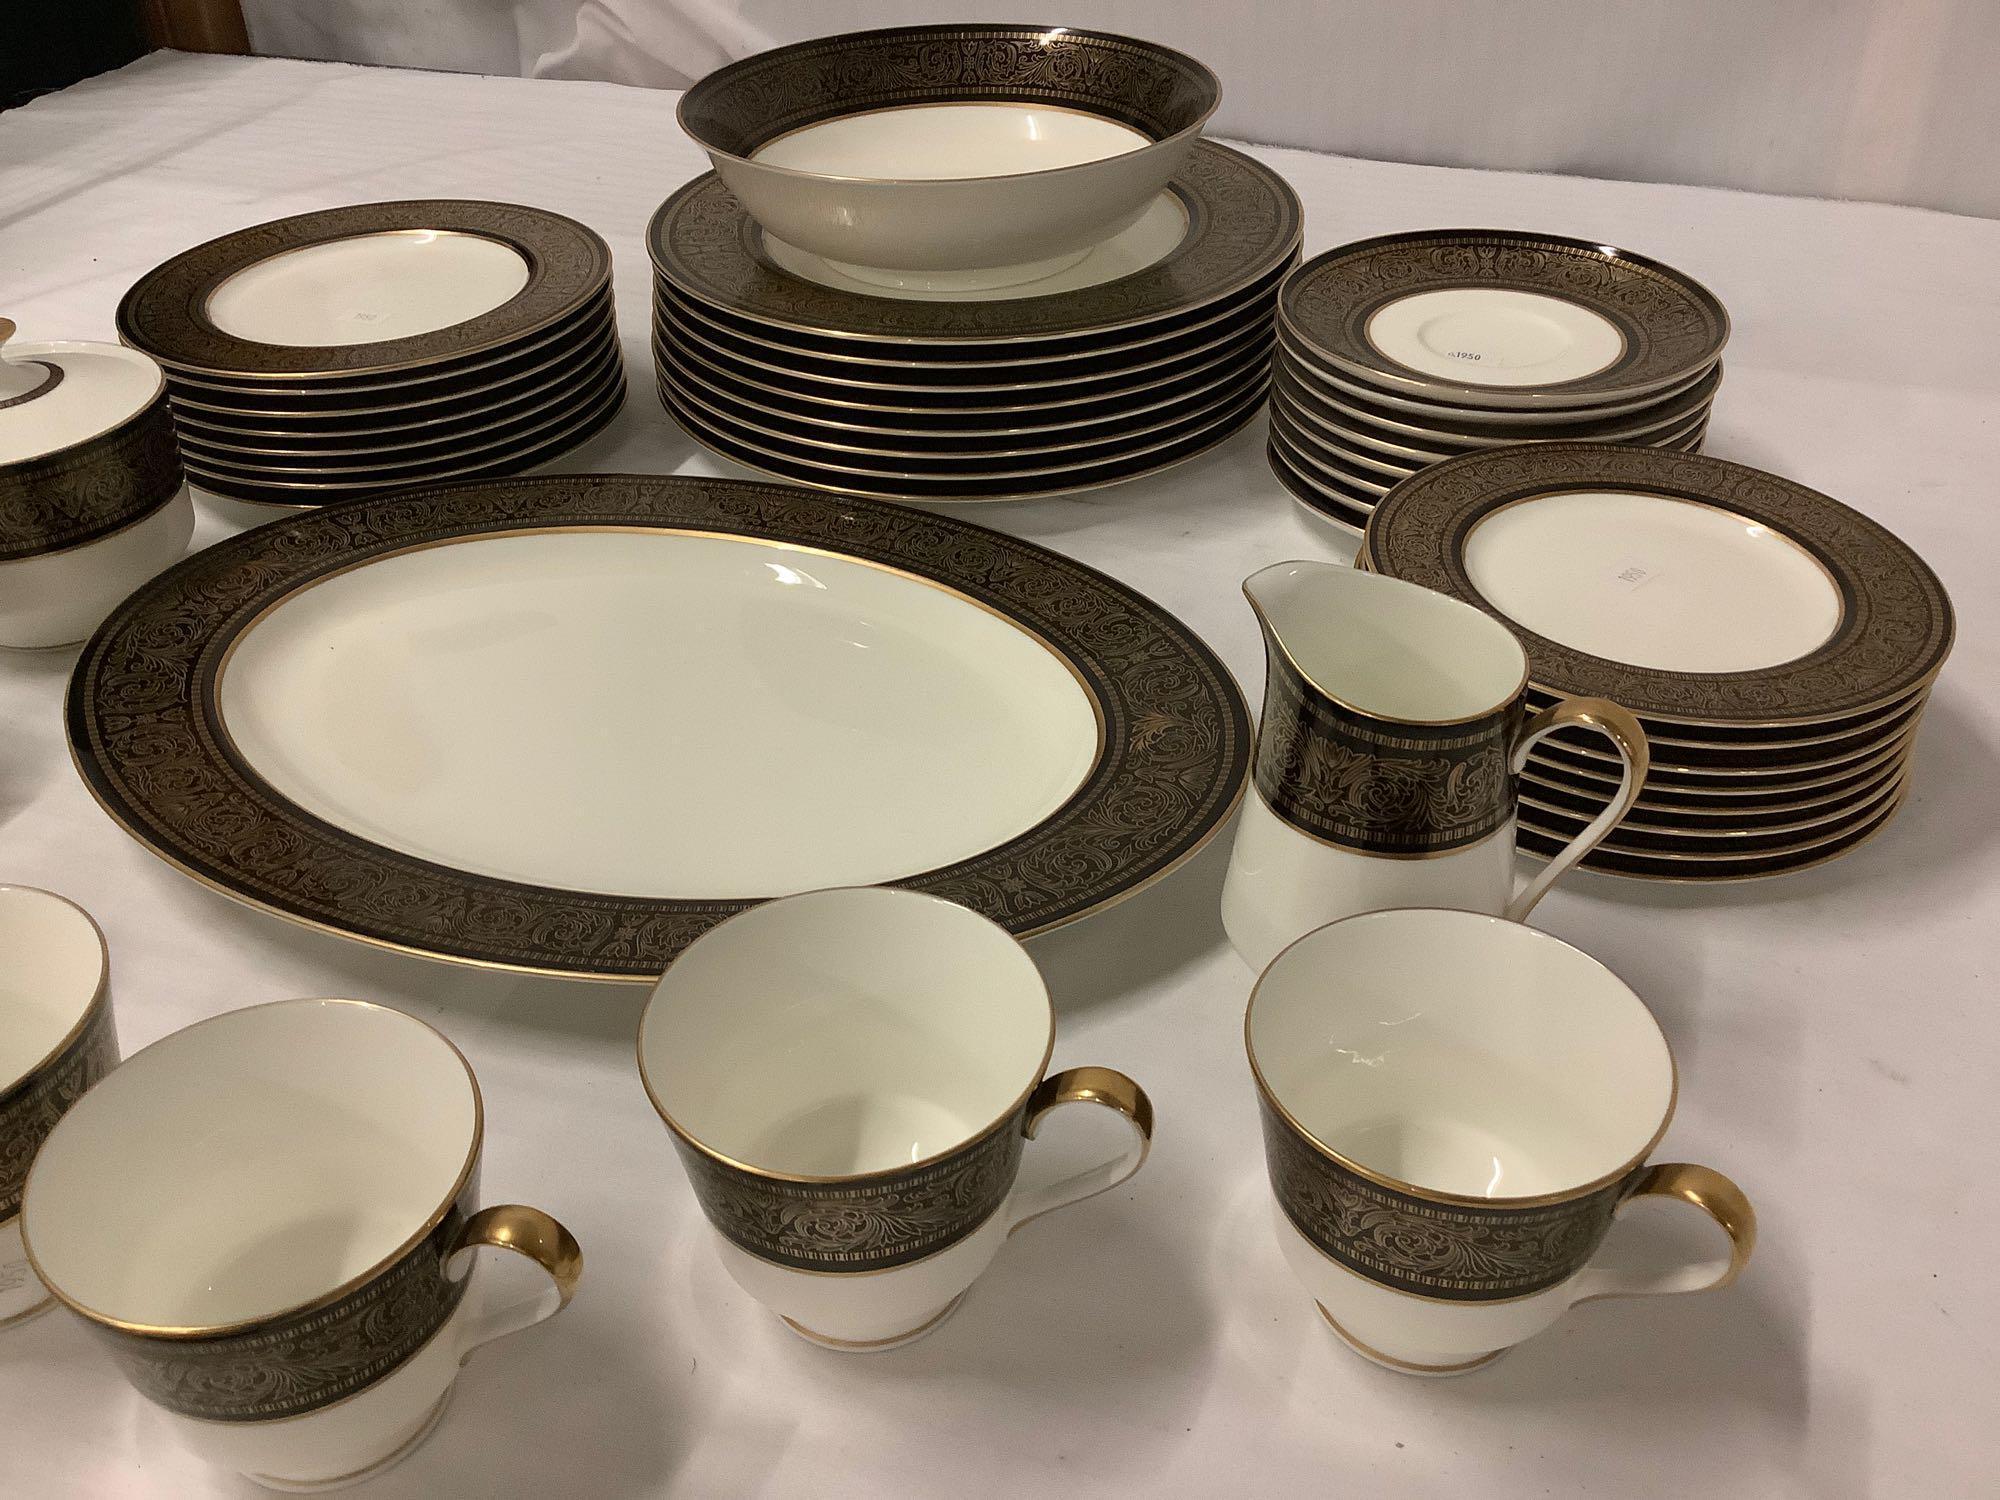 42 pc service for 6 porcelain china set by Mikasa - Mount Holyoke, made in Narumi Japan